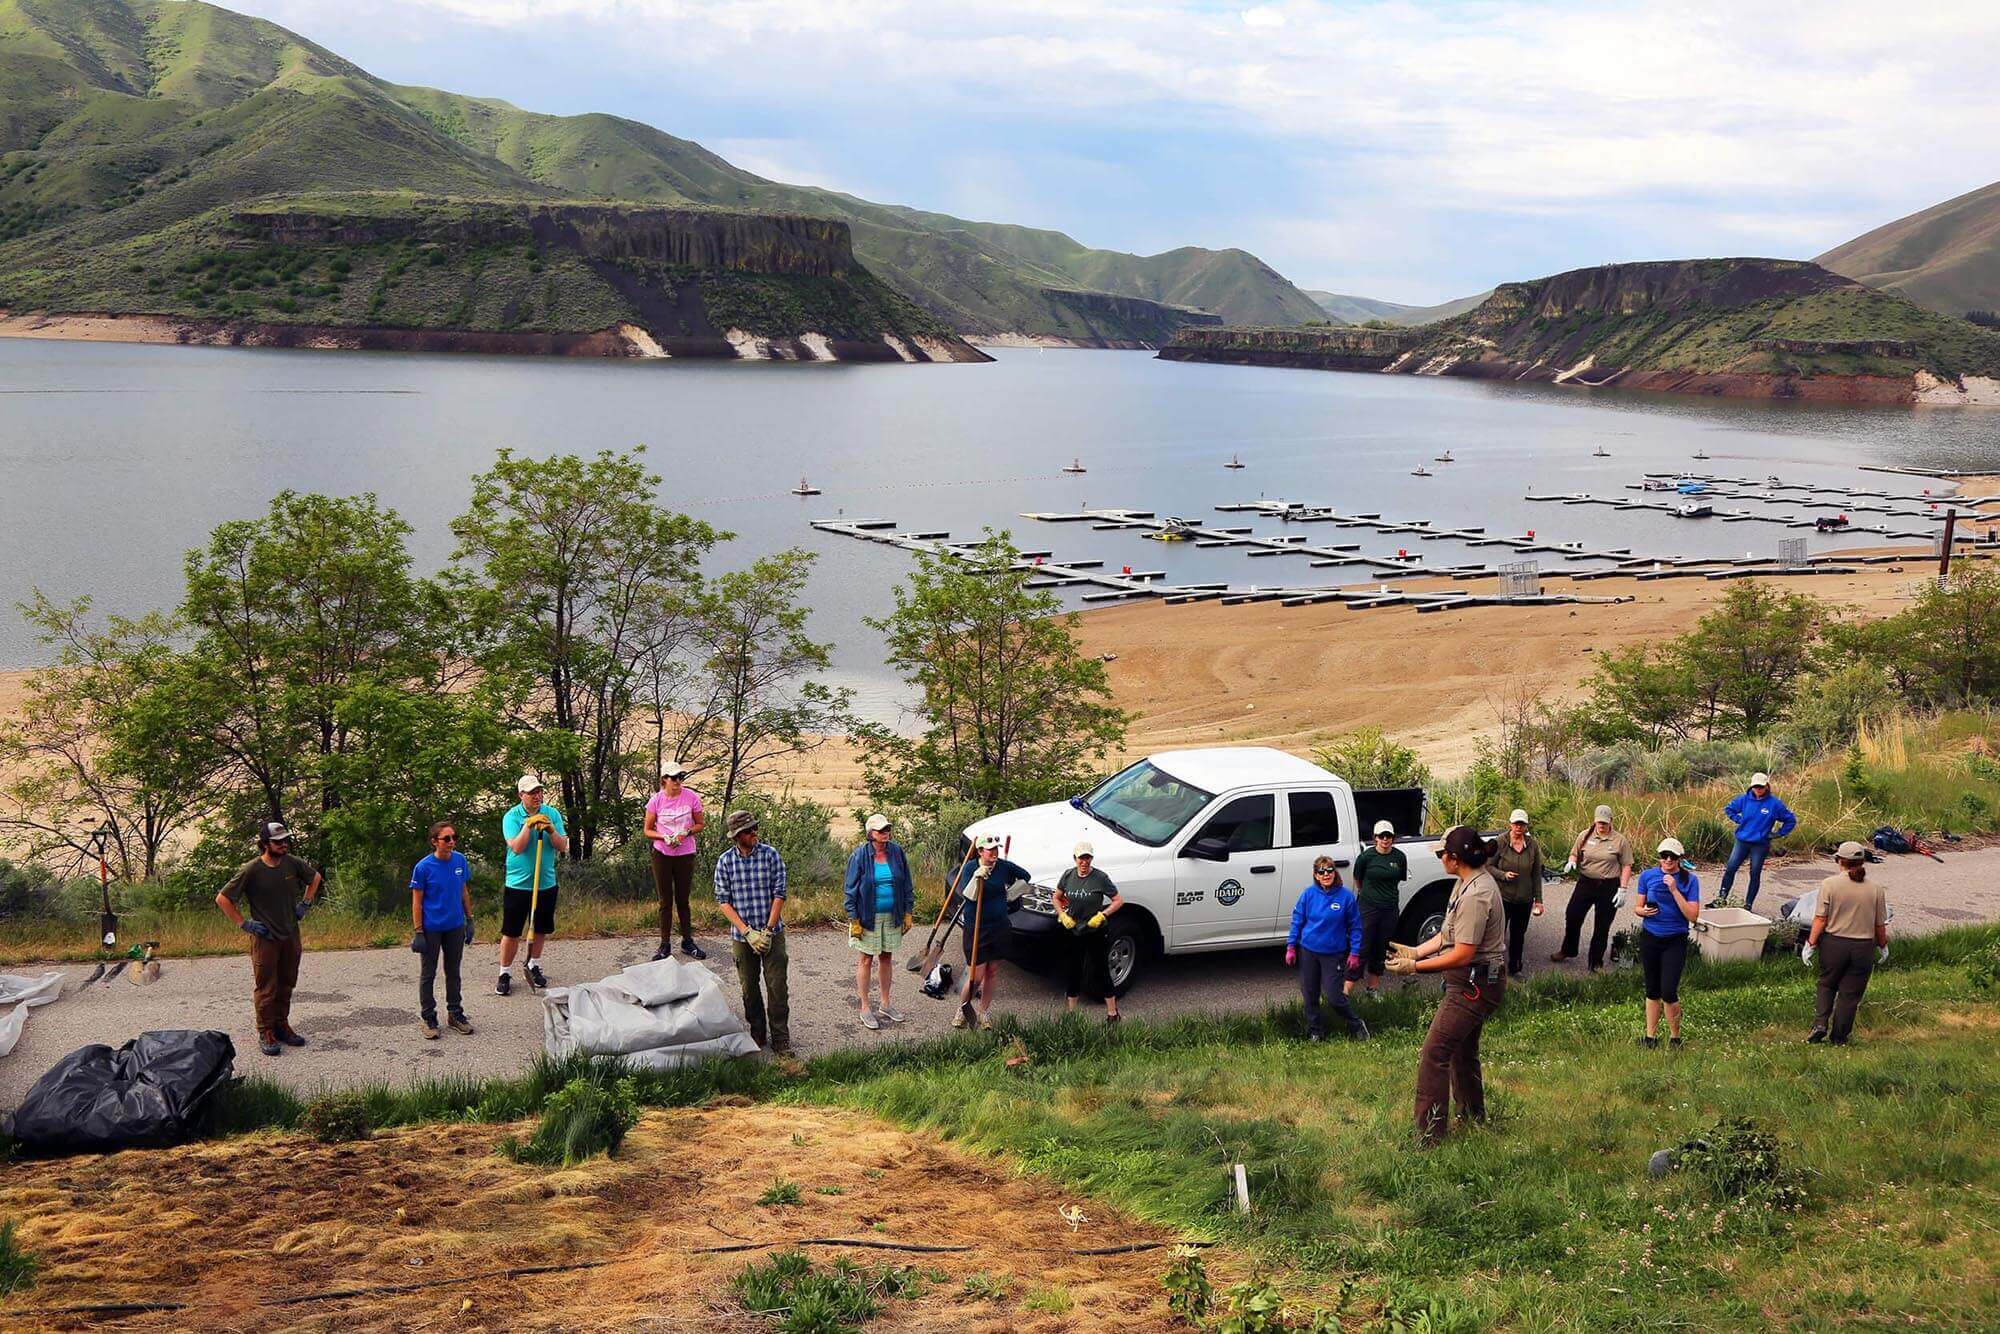 A group of volunteers holding gardening tools at a Travel With Care event and a beach, docks, body of water and mountains in the background.